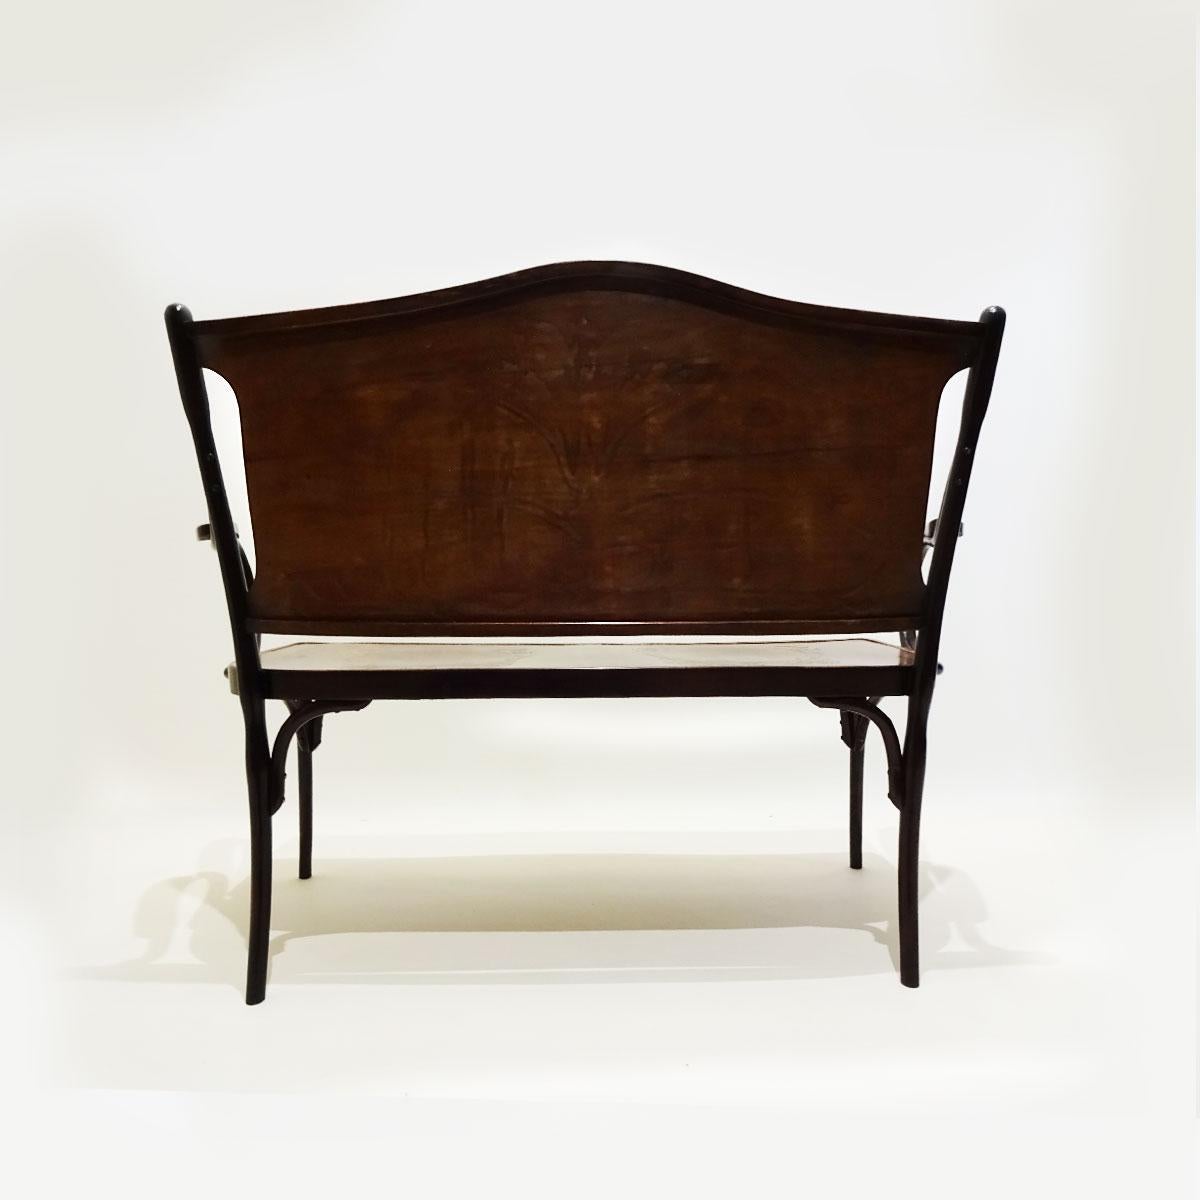 Antique Embossed Bentwood Bench Attributed to Jacob and Josef Kohn 1